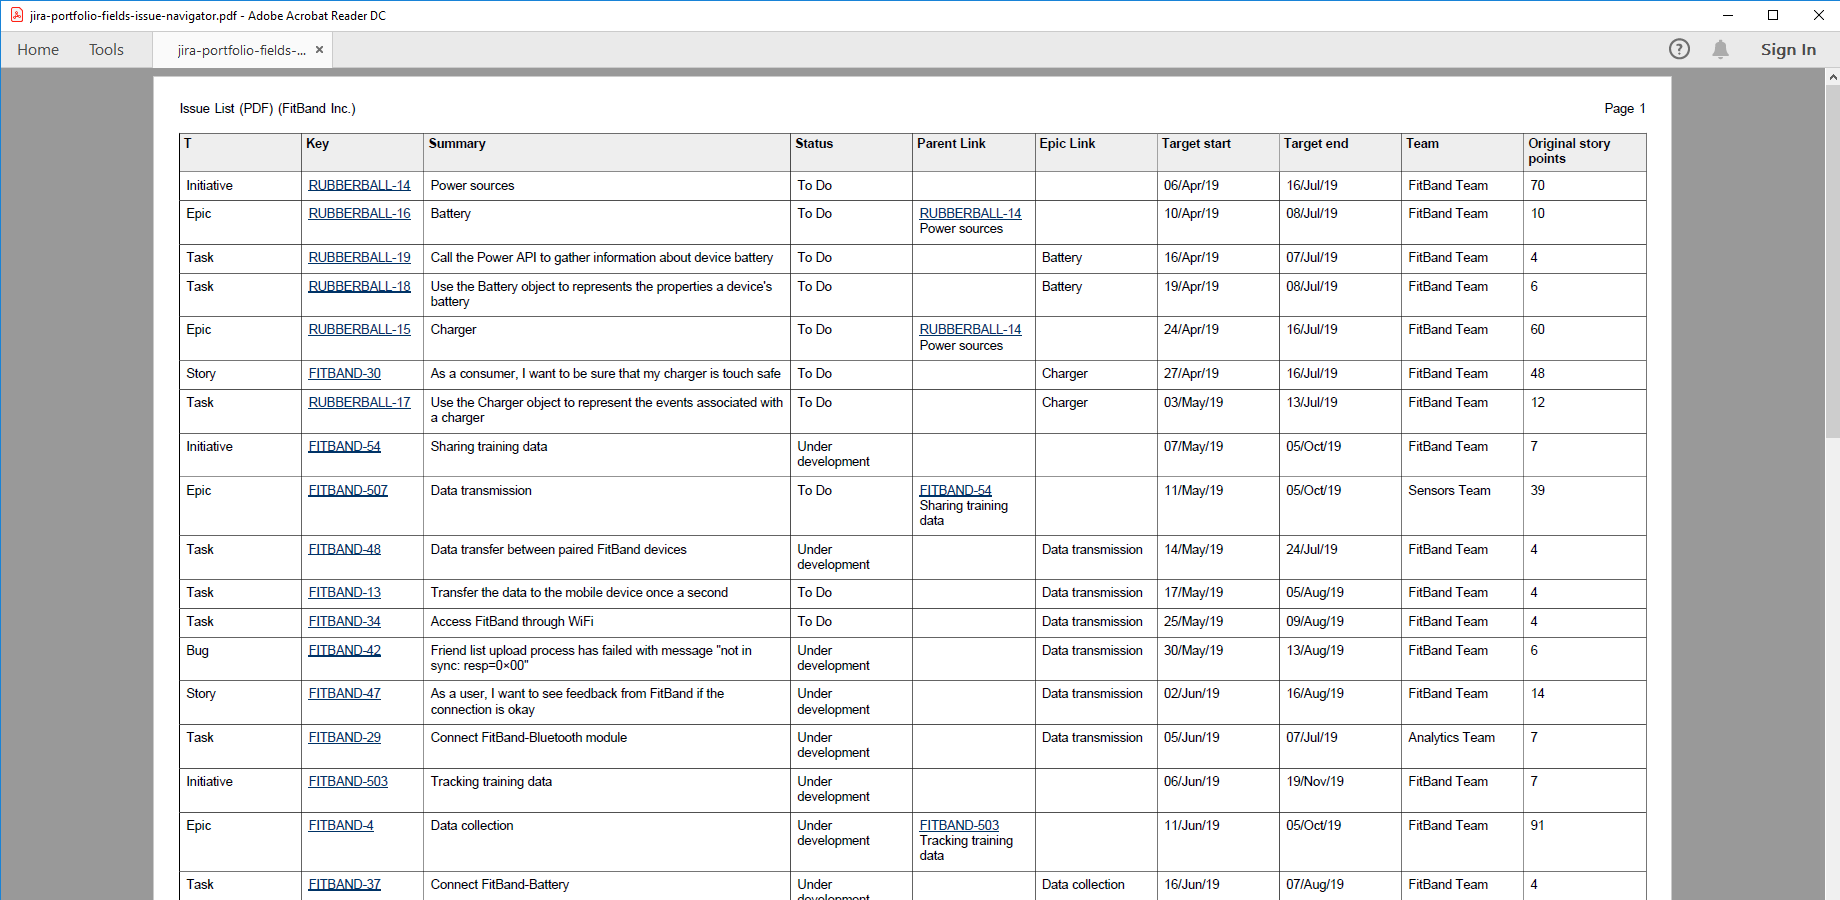 Issue list with Advanced Roadmaps fields